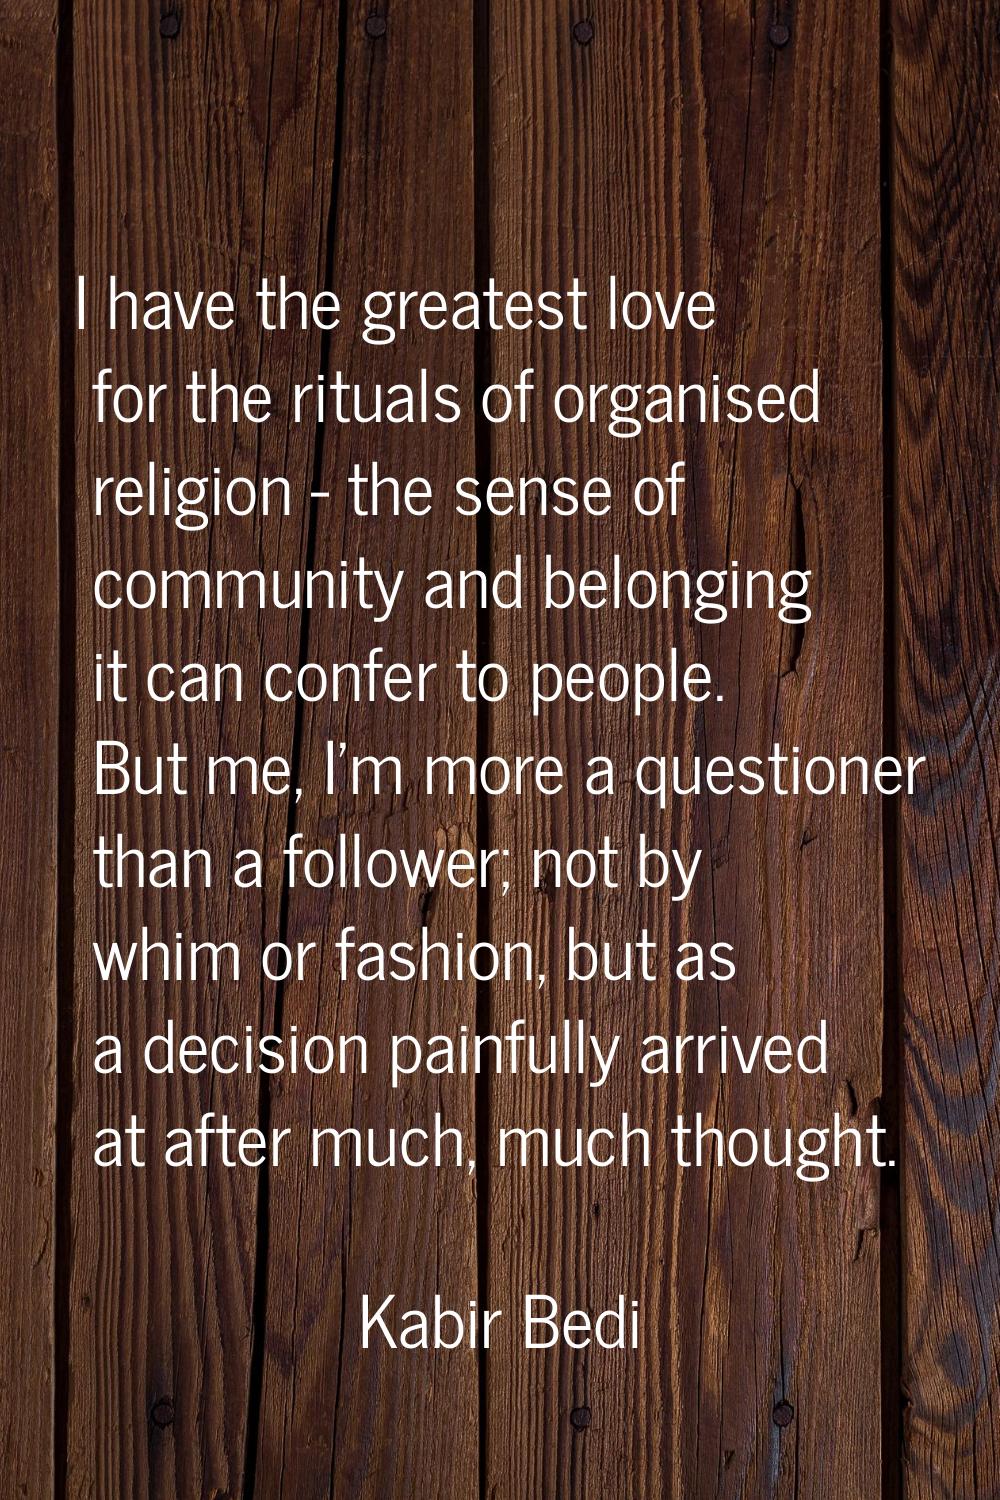 I have the greatest love for the rituals of organised religion - the sense of community and belongi